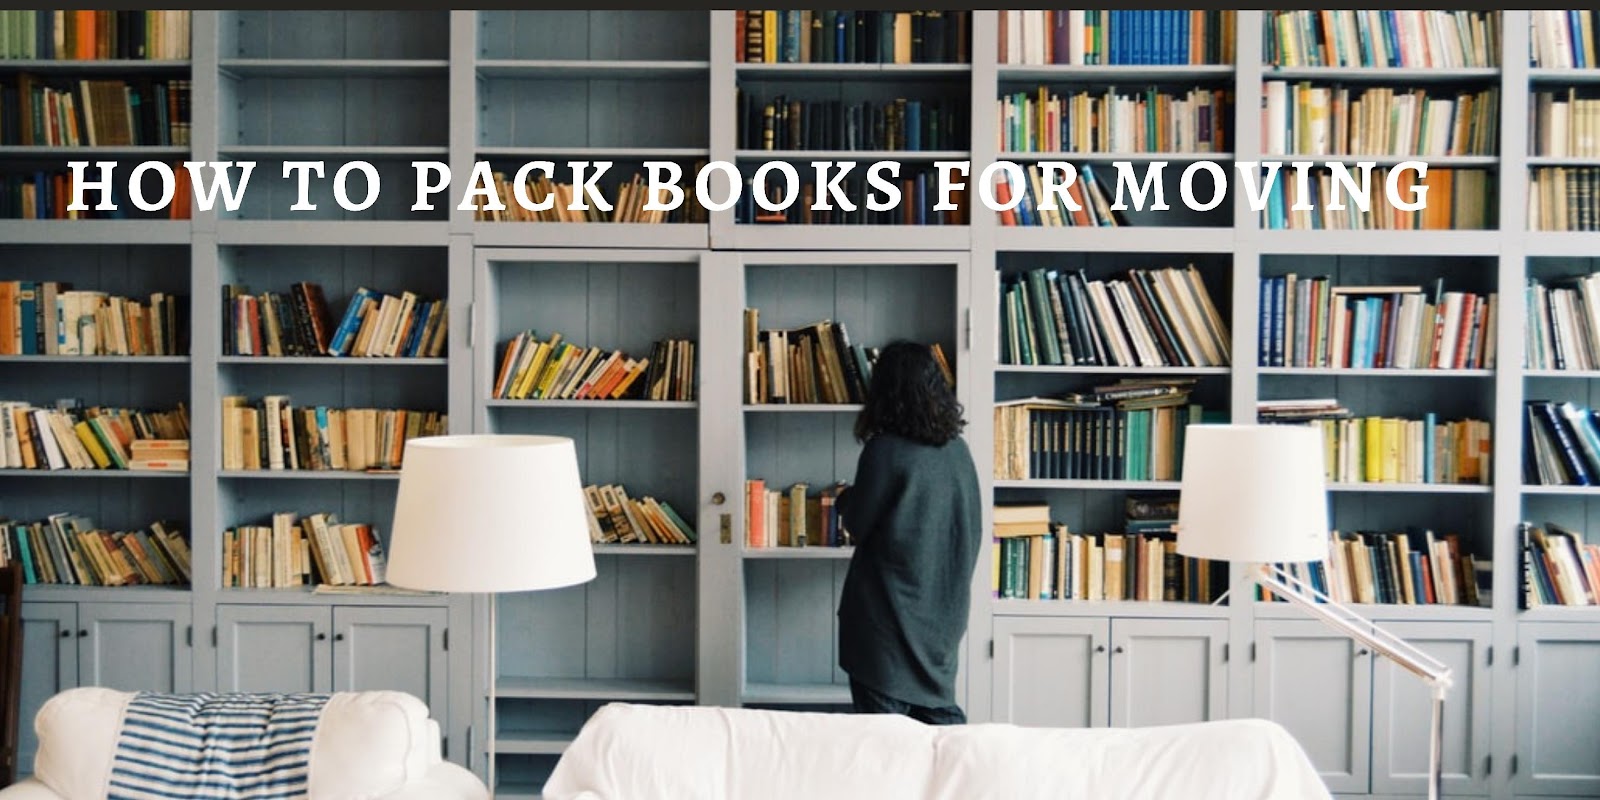 Macintosh HD:Users:duafaisal:Downloads:how-to-pack-books-for-moving.jpg